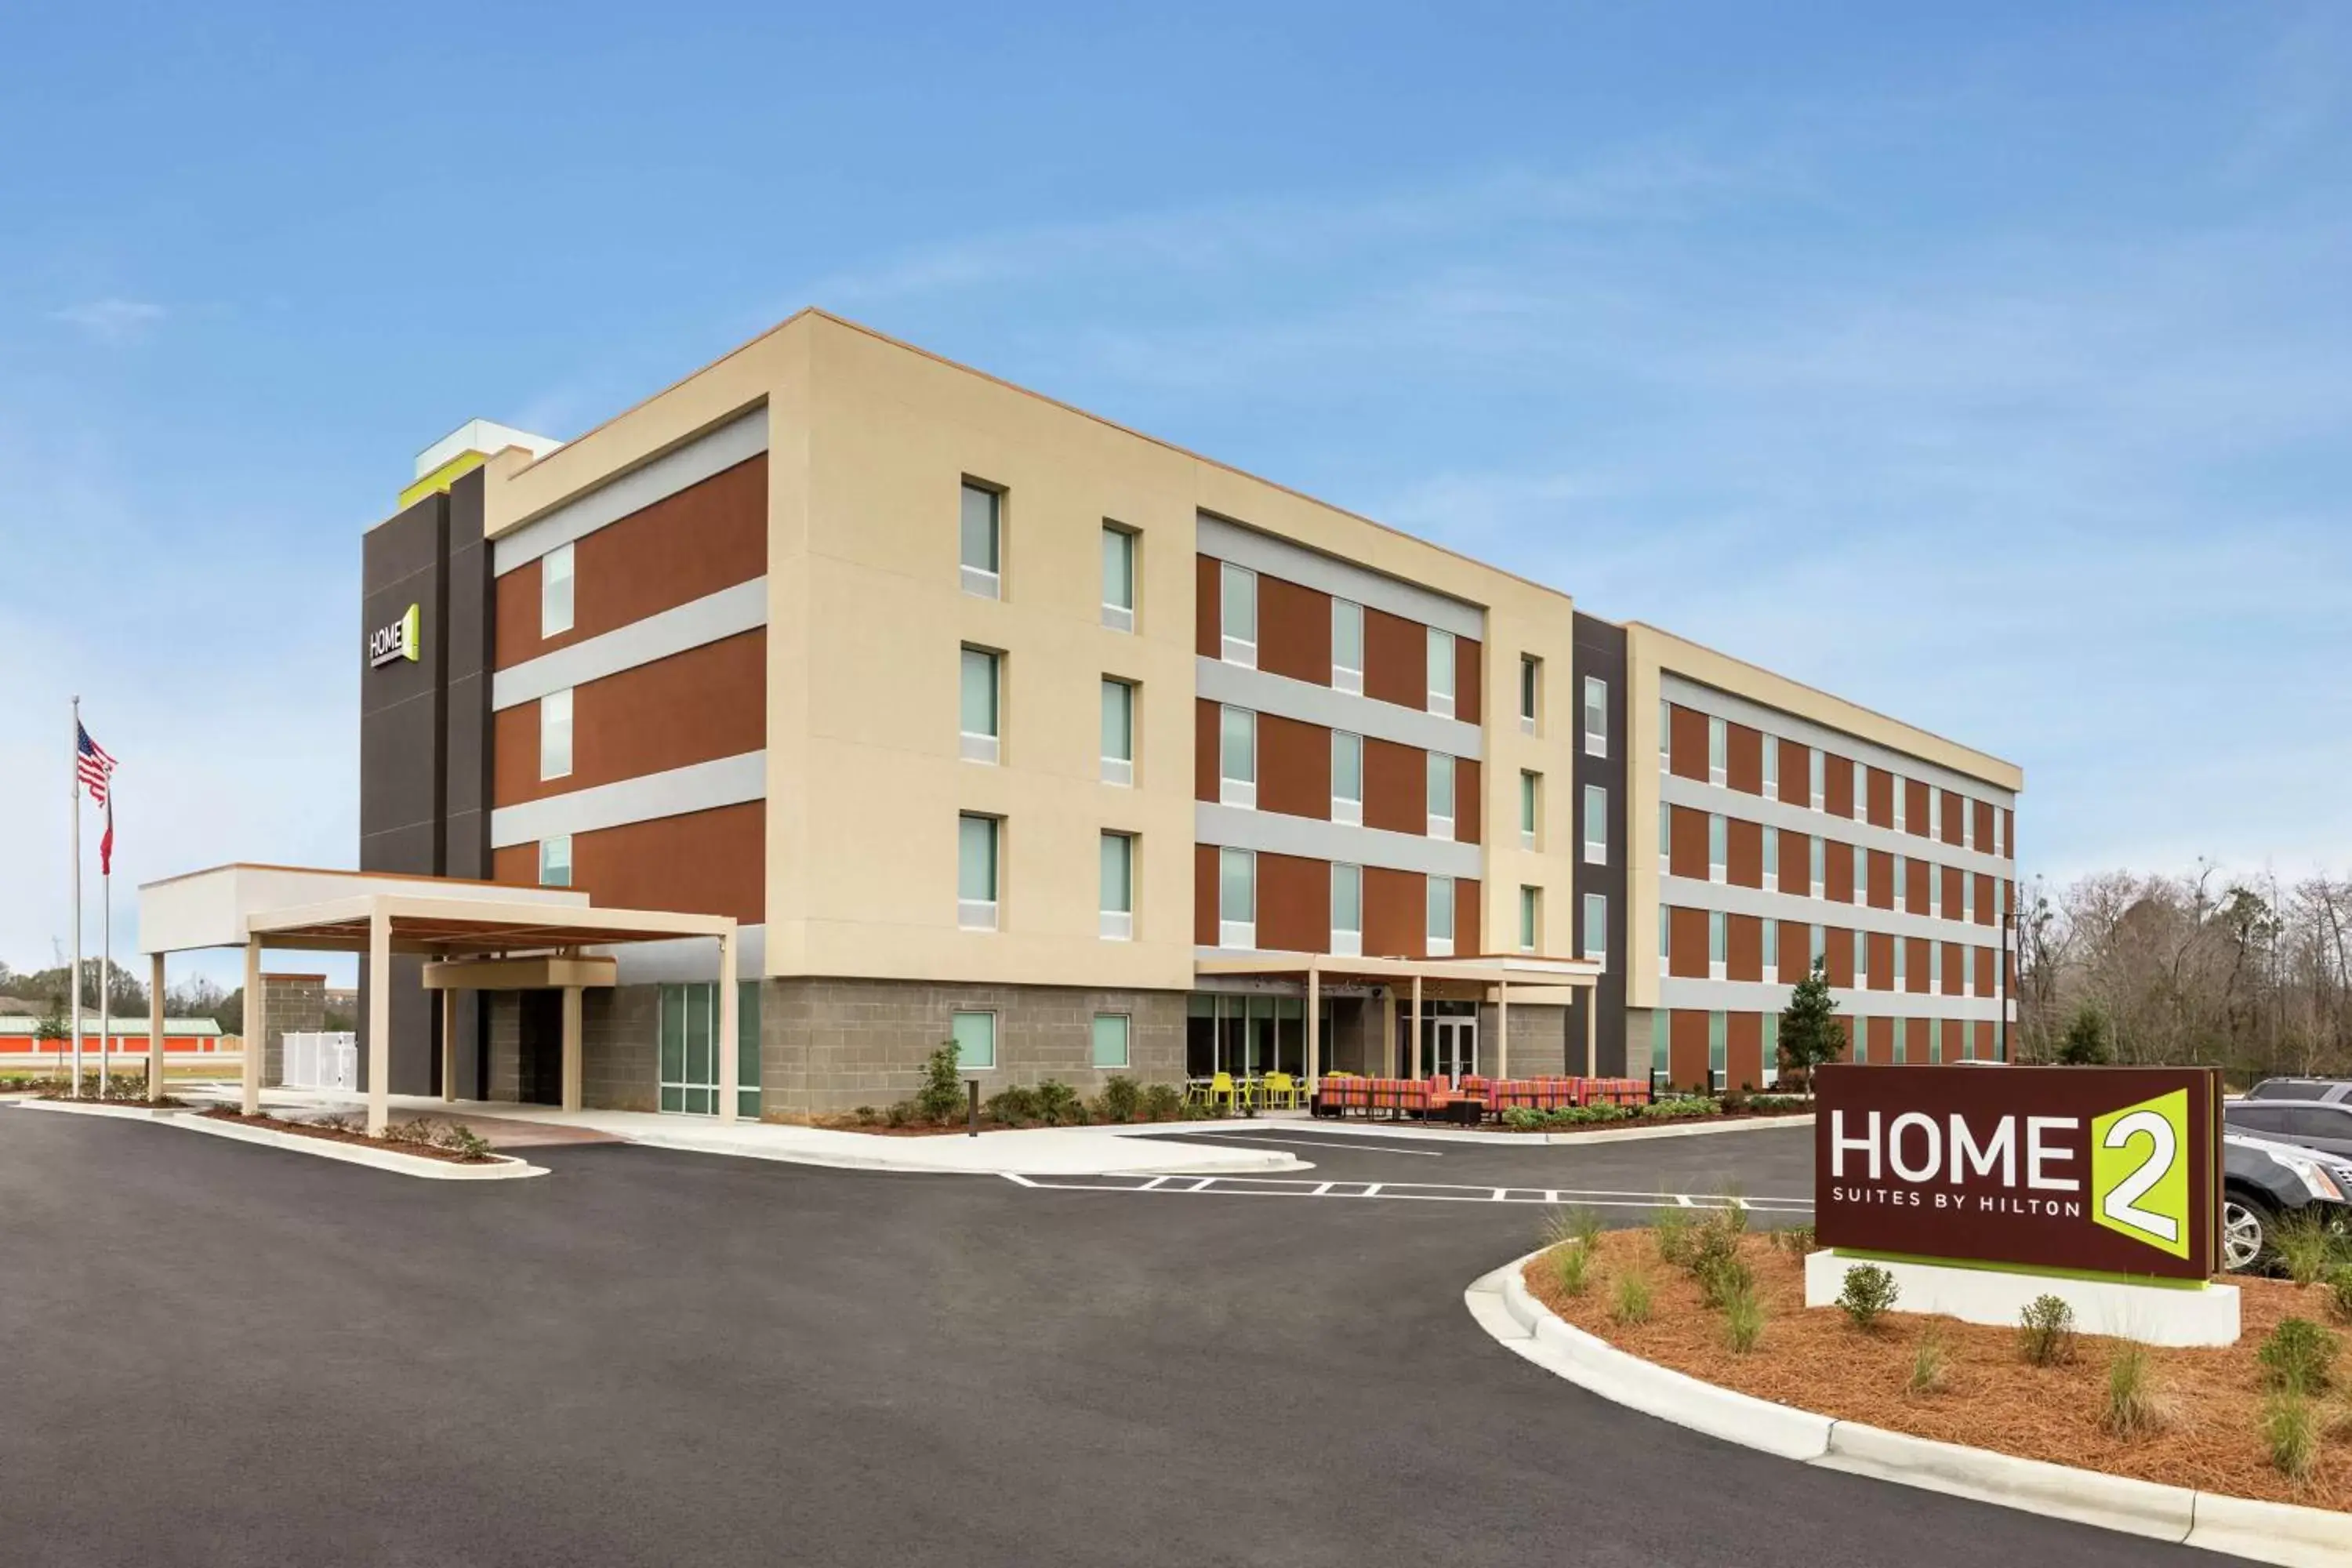 Property Building in Home2 Suites By Hilton Statesboro